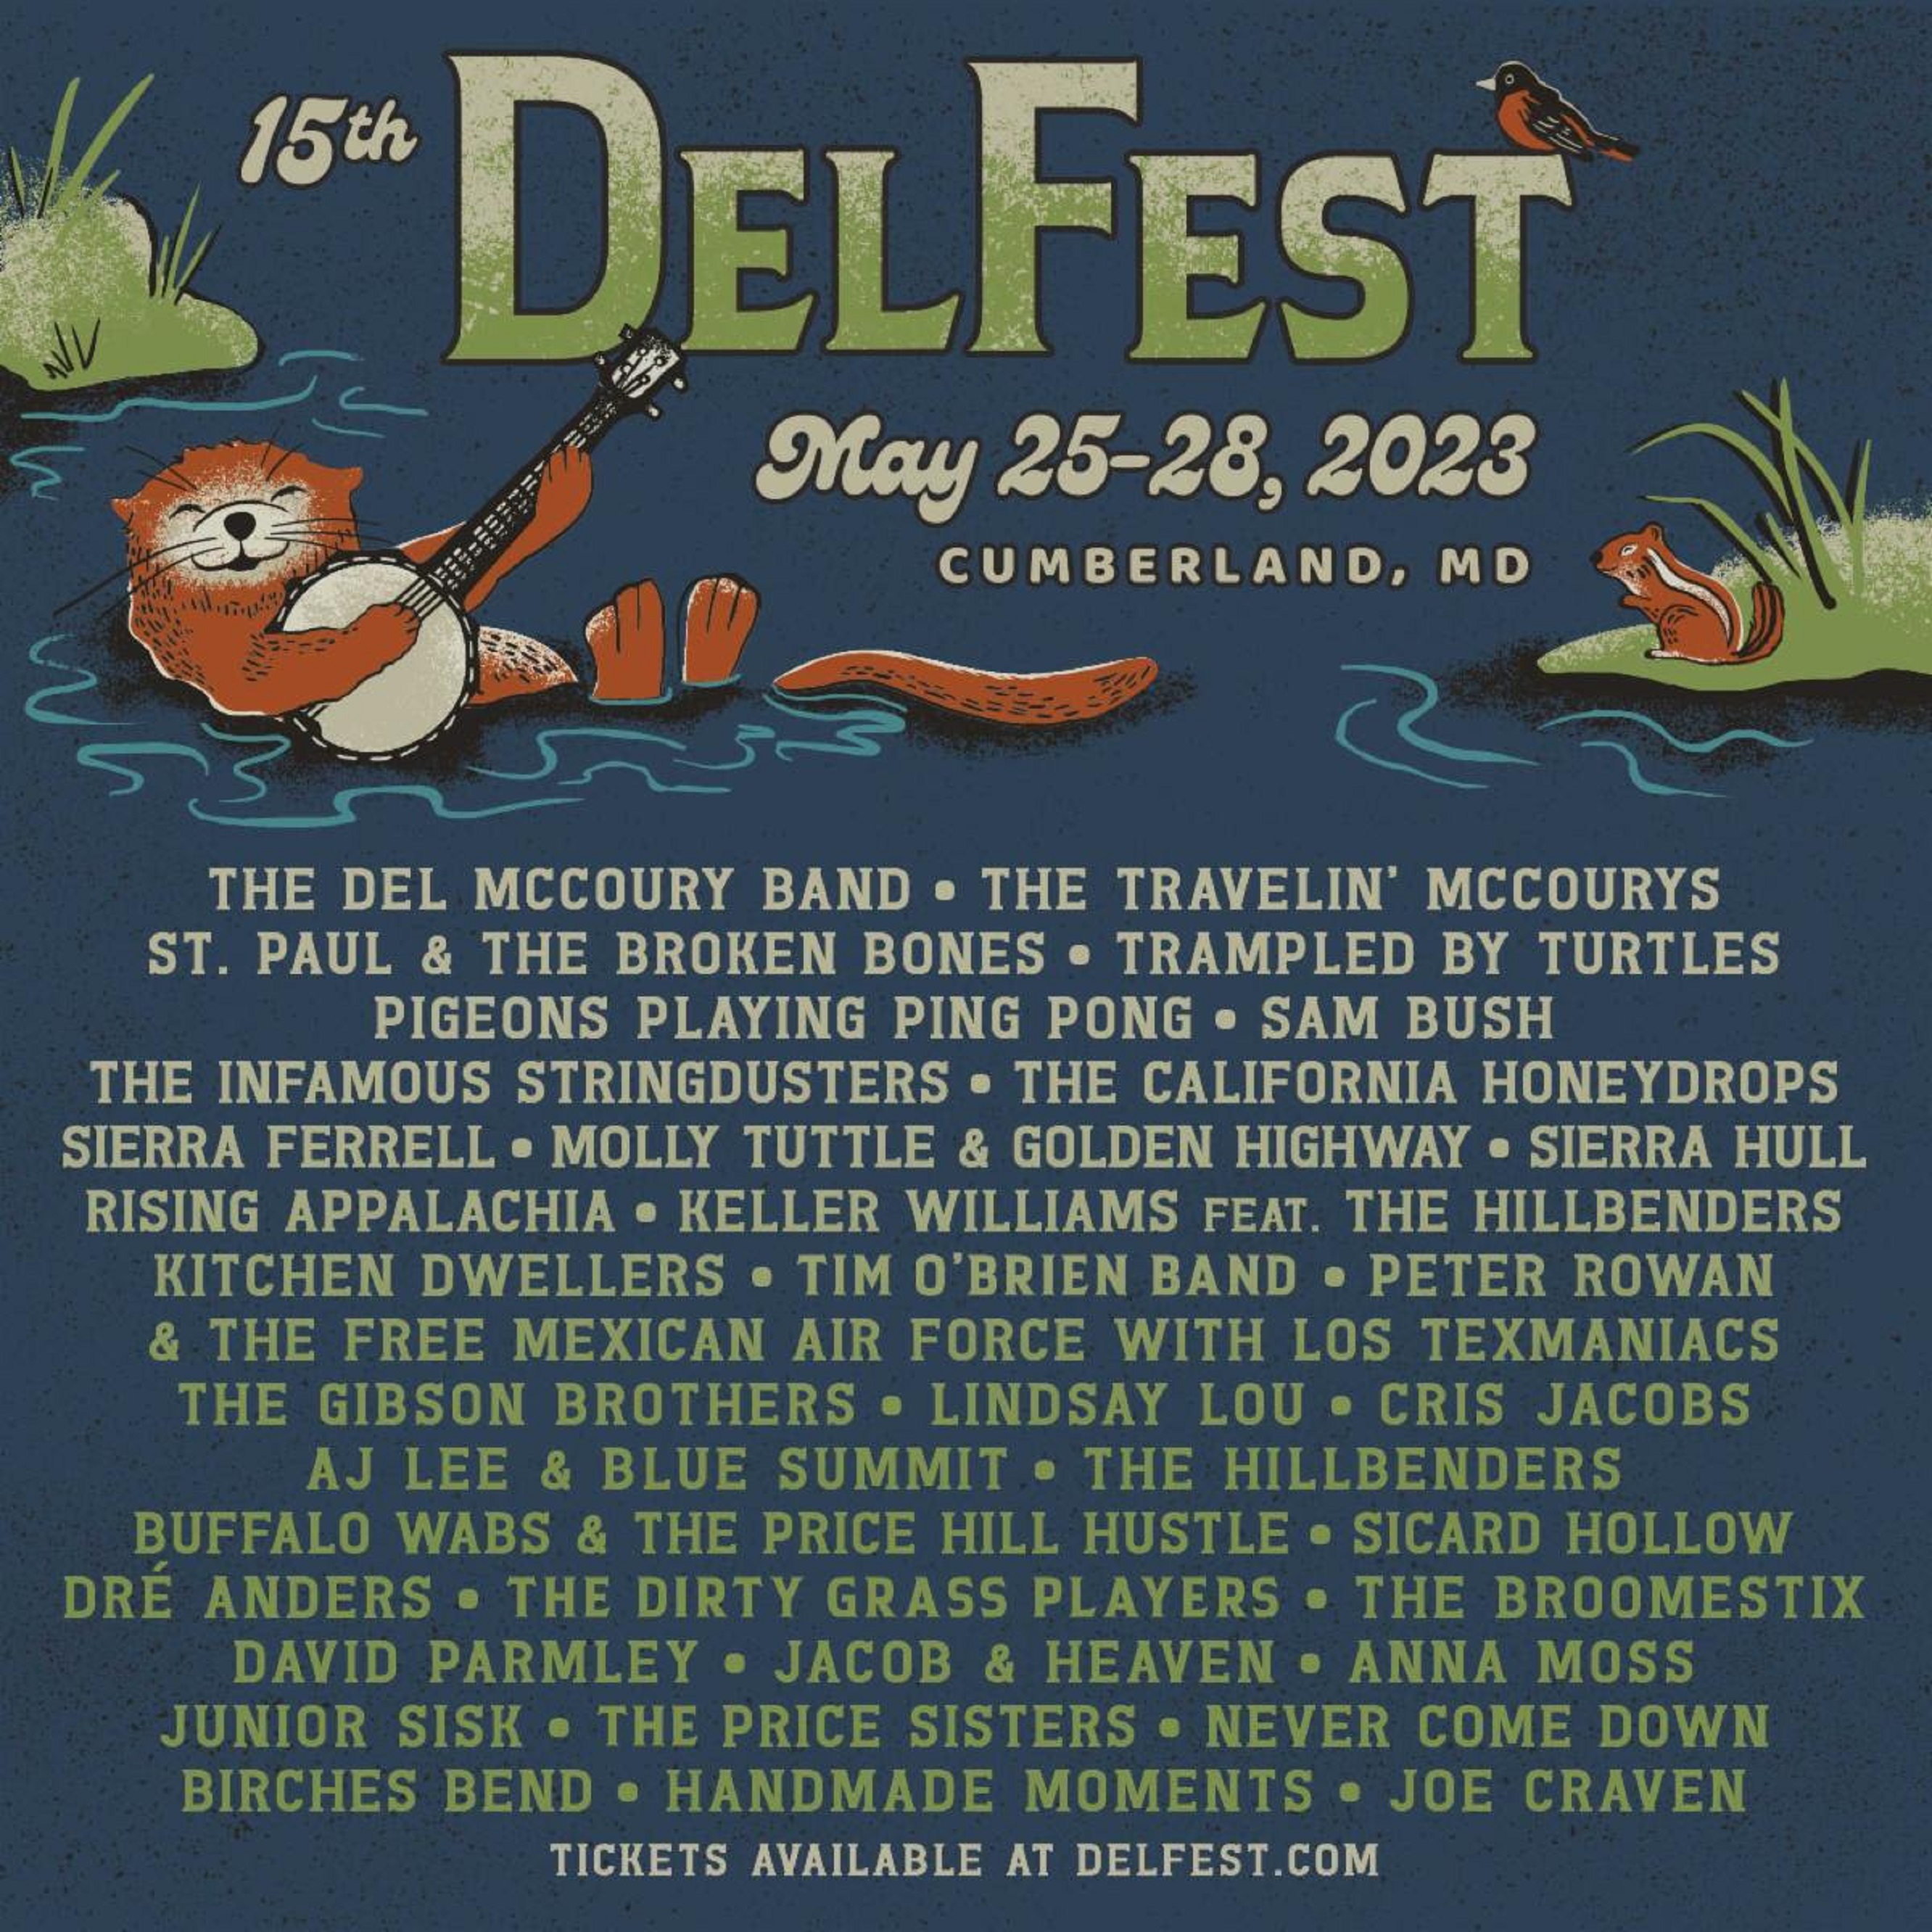 DelFest adds Sam Bush, Molly Tuttle & Golden Highway, Keller Williams Grass feat. The Hillbenders, The Gibson Brothers and more to 2023 Lineup